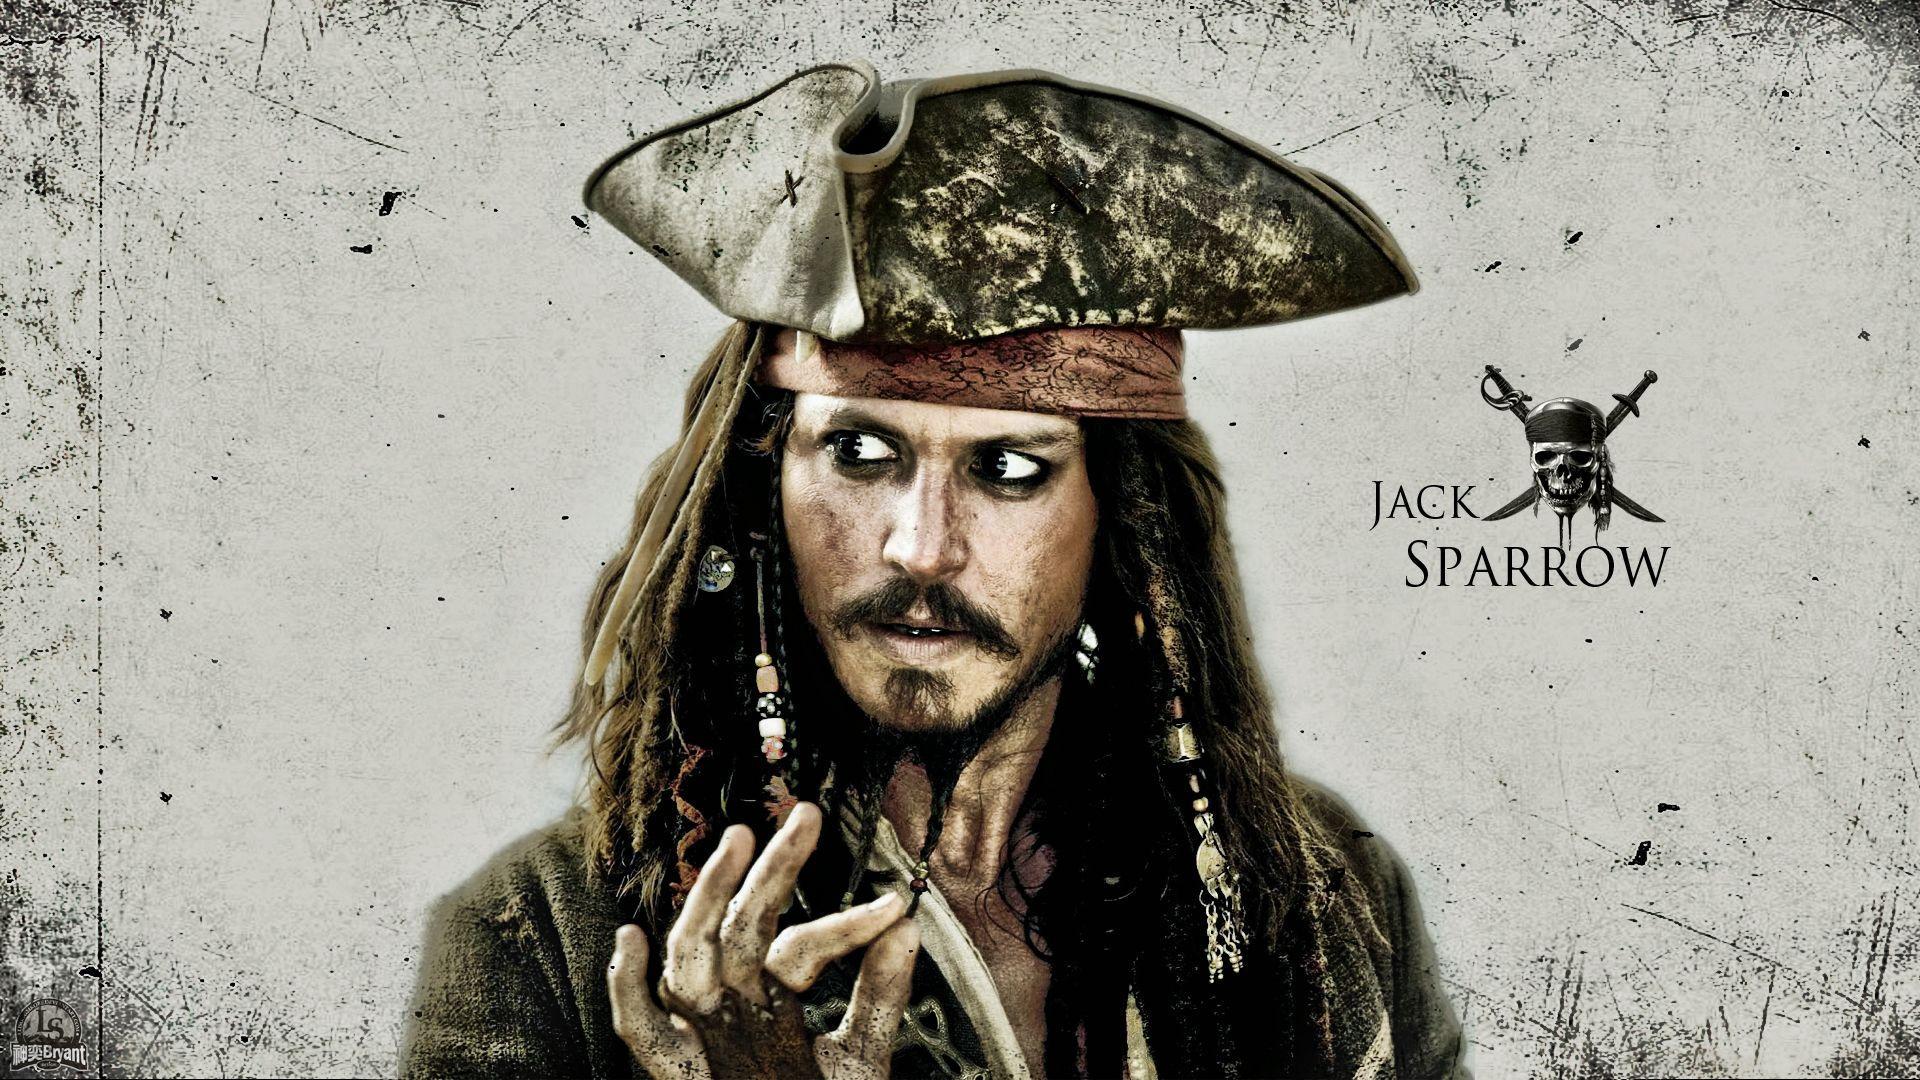 Pirates of the Caribbean Jack Sparrow Pirate Johnny Depp wallpaper